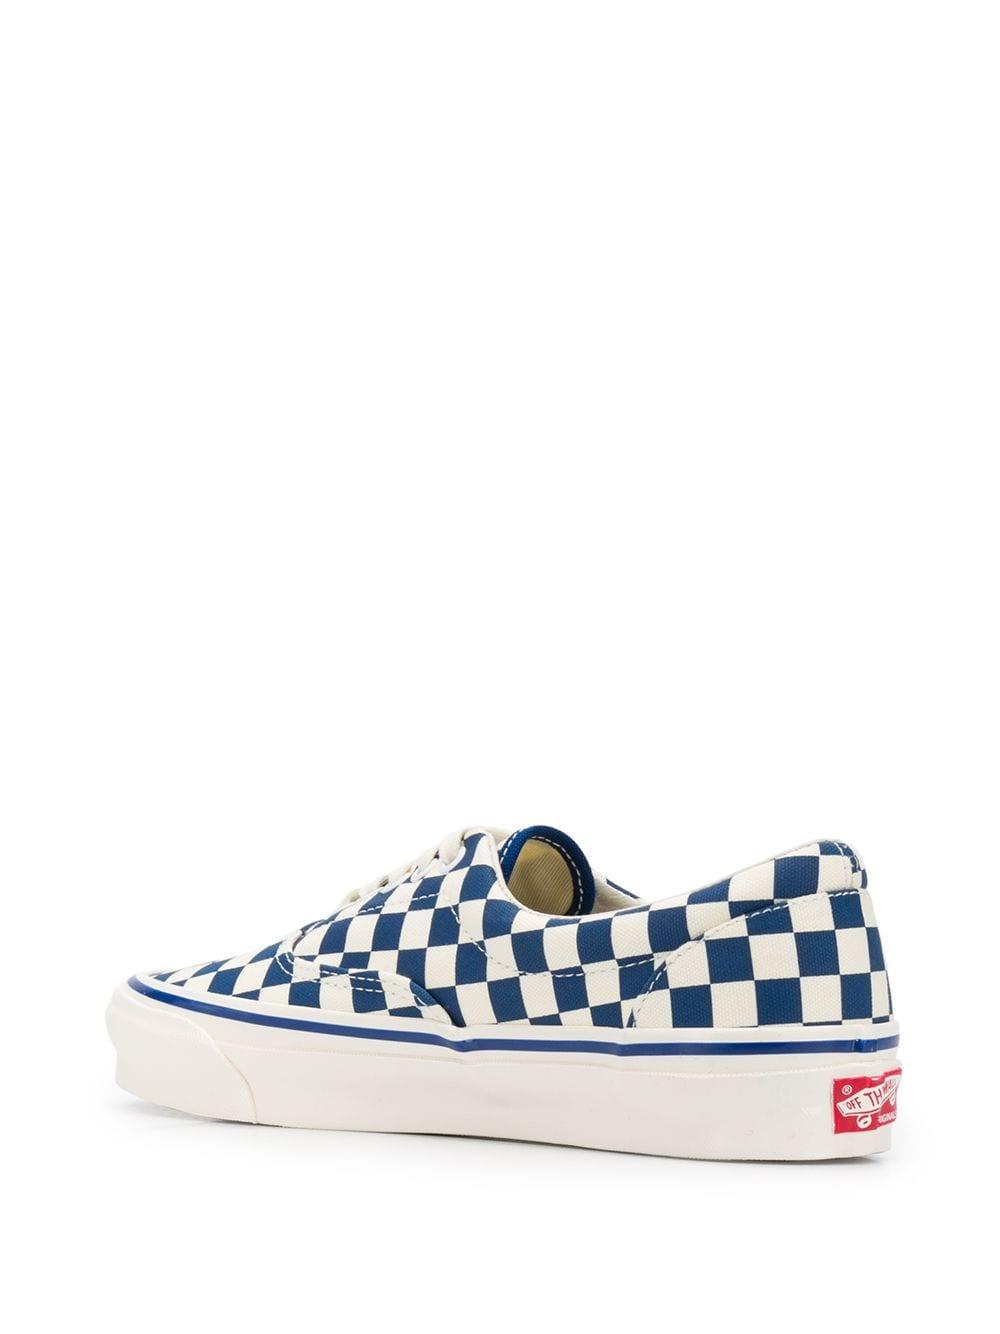 Vans Rubber Checkerboard Lace-up Sneakers in Blue | Lyst